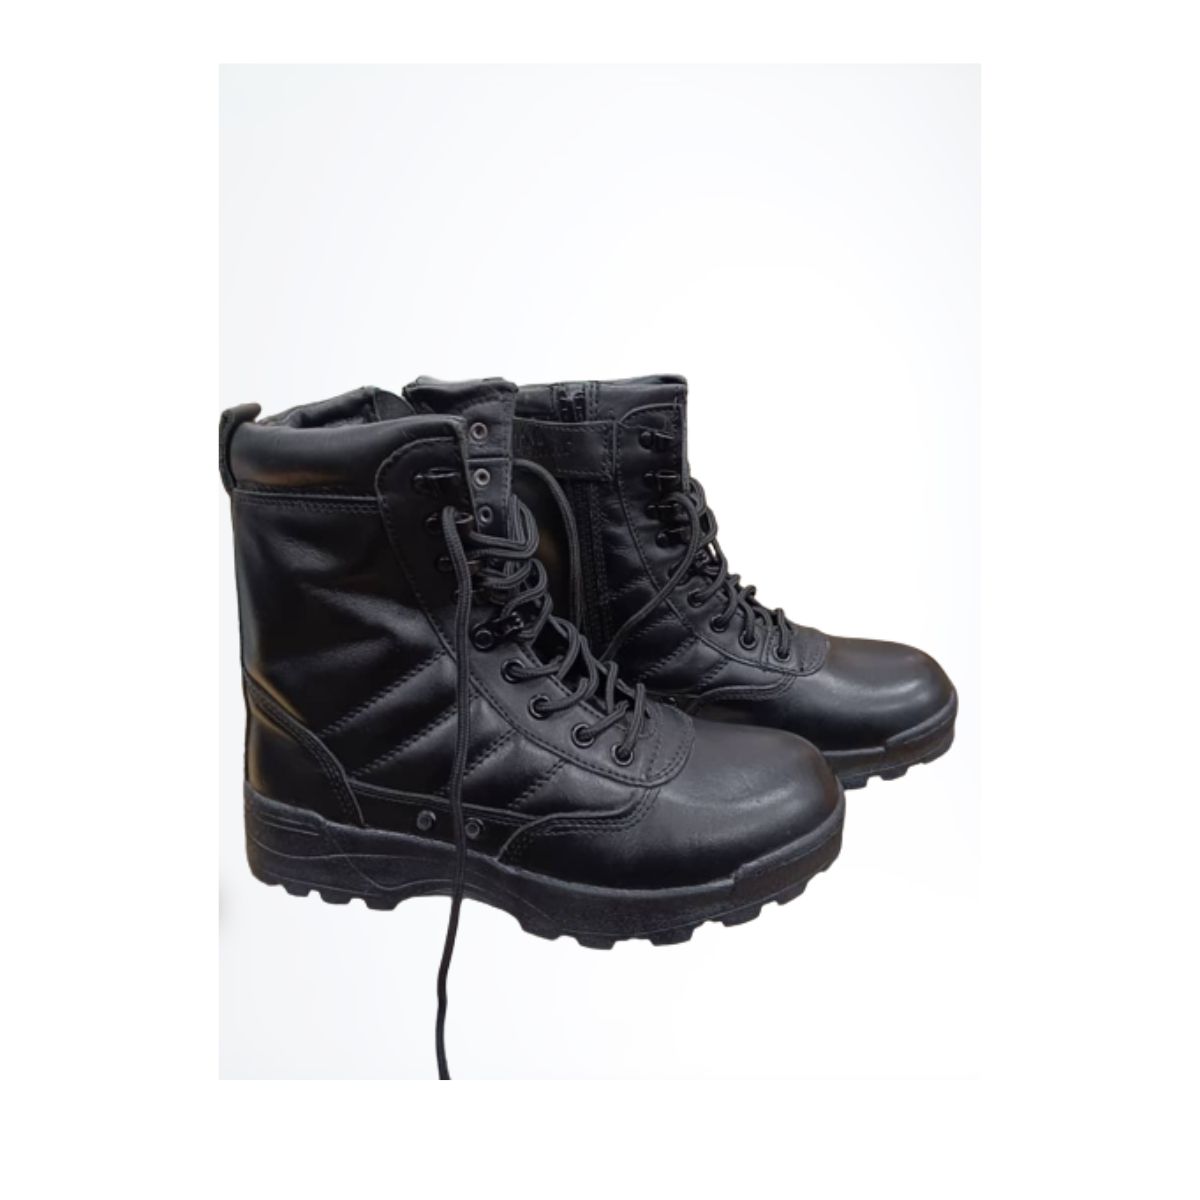 Tactical Boot - Black - Size 40